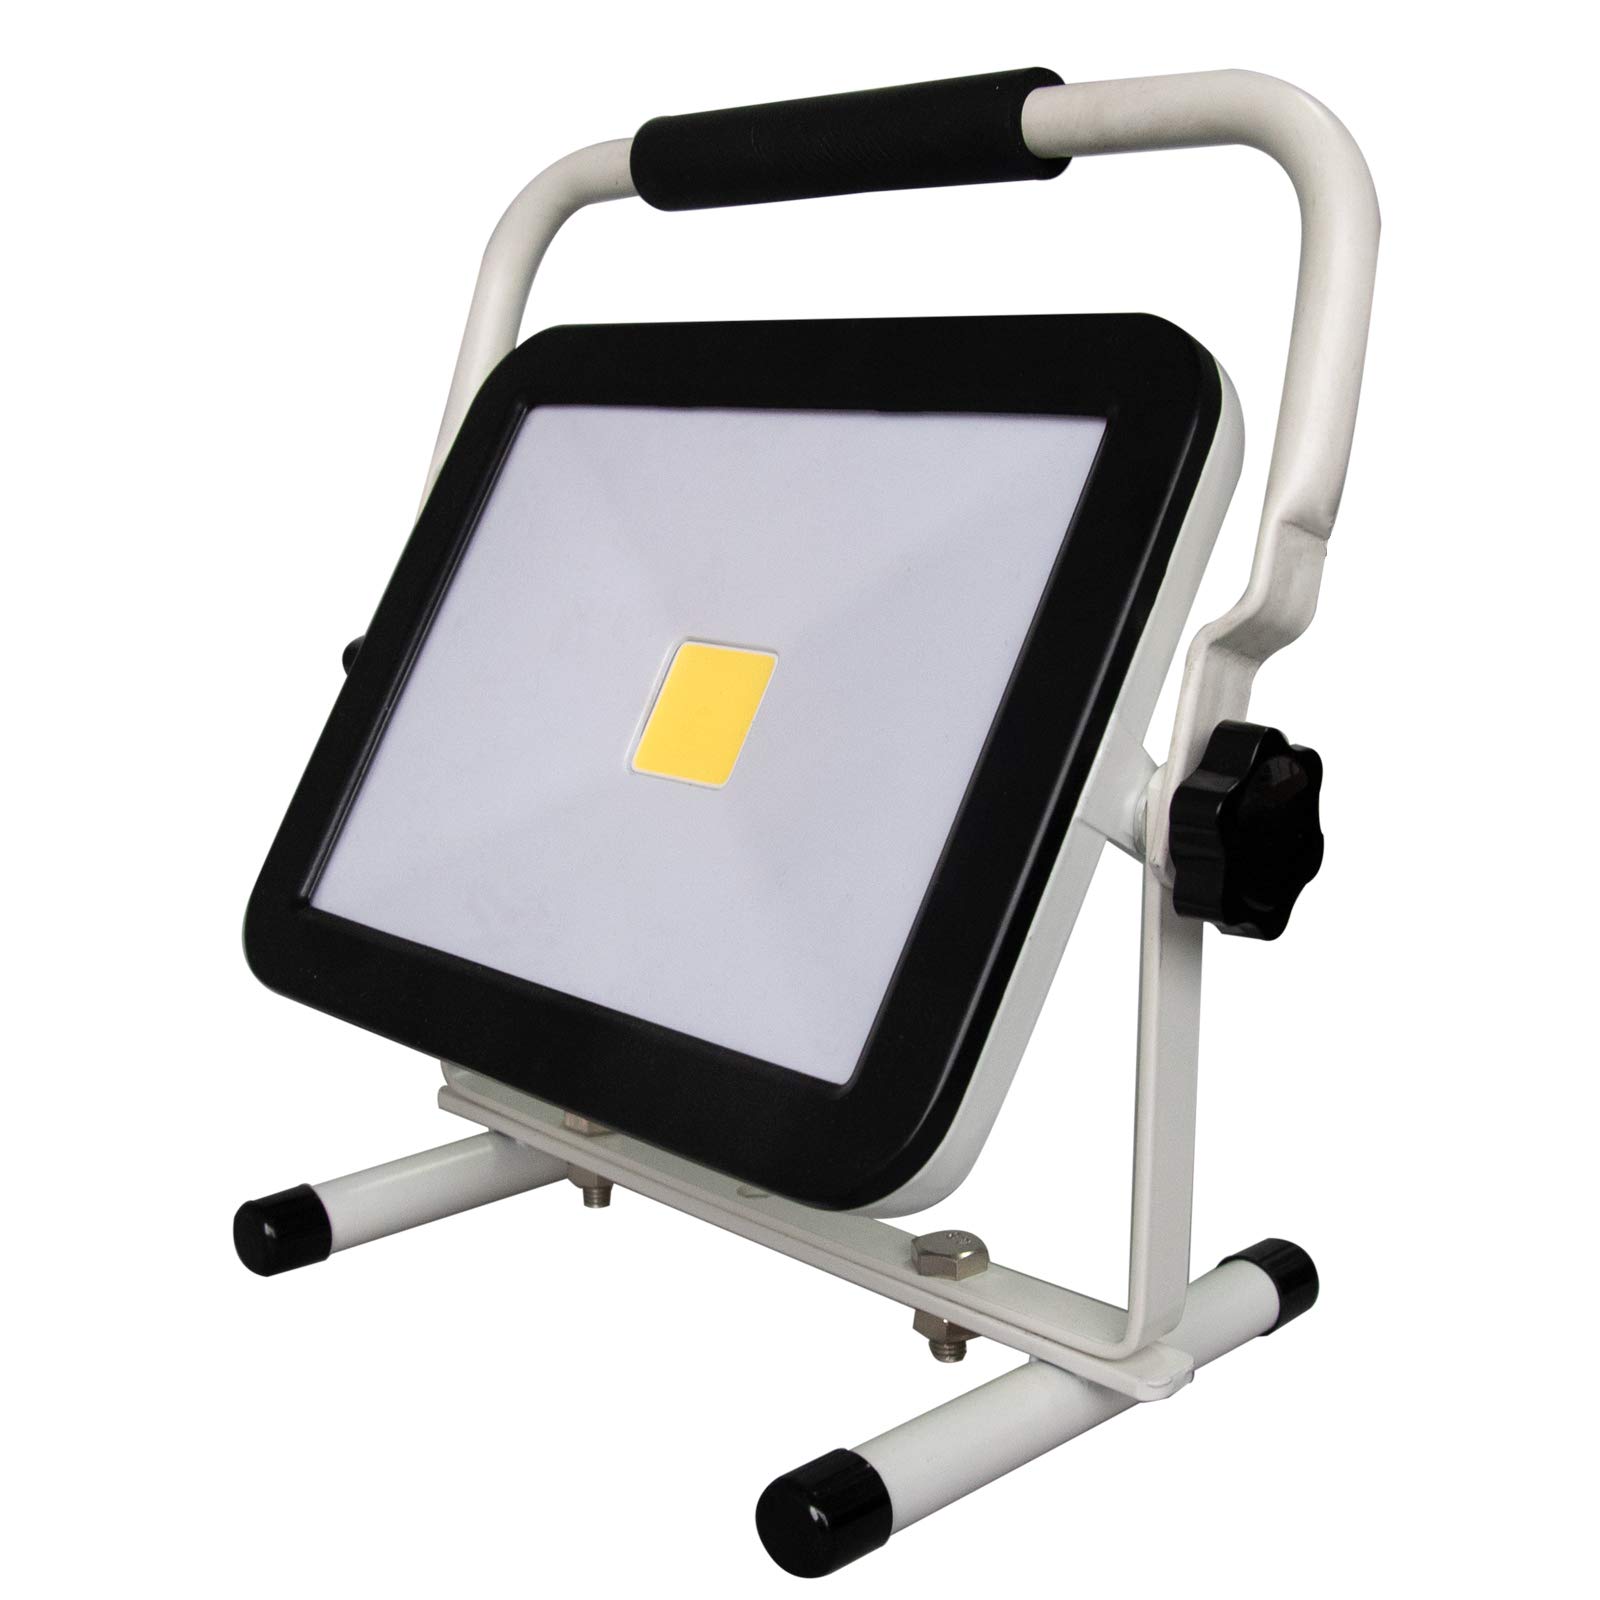 Rechargeable LED Portable Work Light 30W,3000LM COB Cordless Working Light with Stand,2 Brightness Levels,IP65 Waterproof Flood Light,360°Titable C...